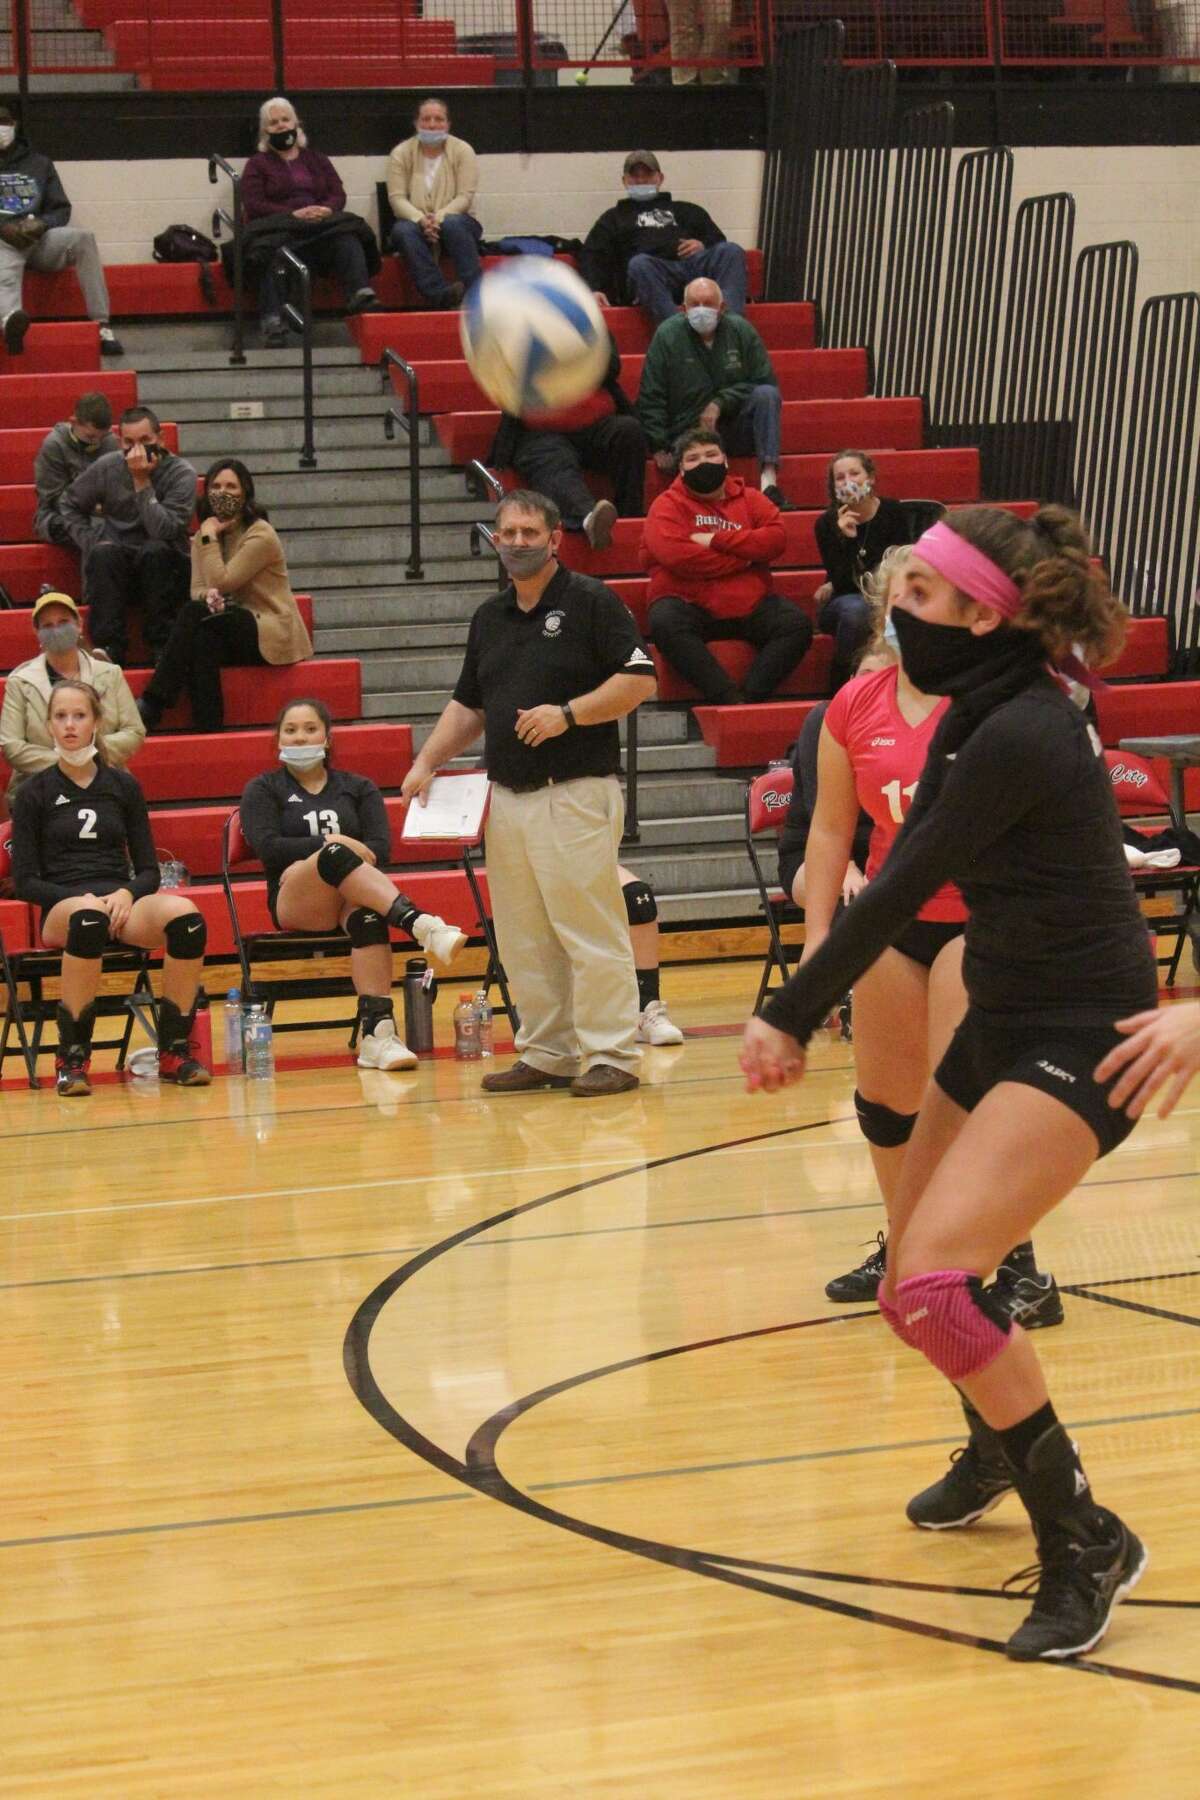 Reed City's volleyball team lost to Fremont in three games on Tuesday